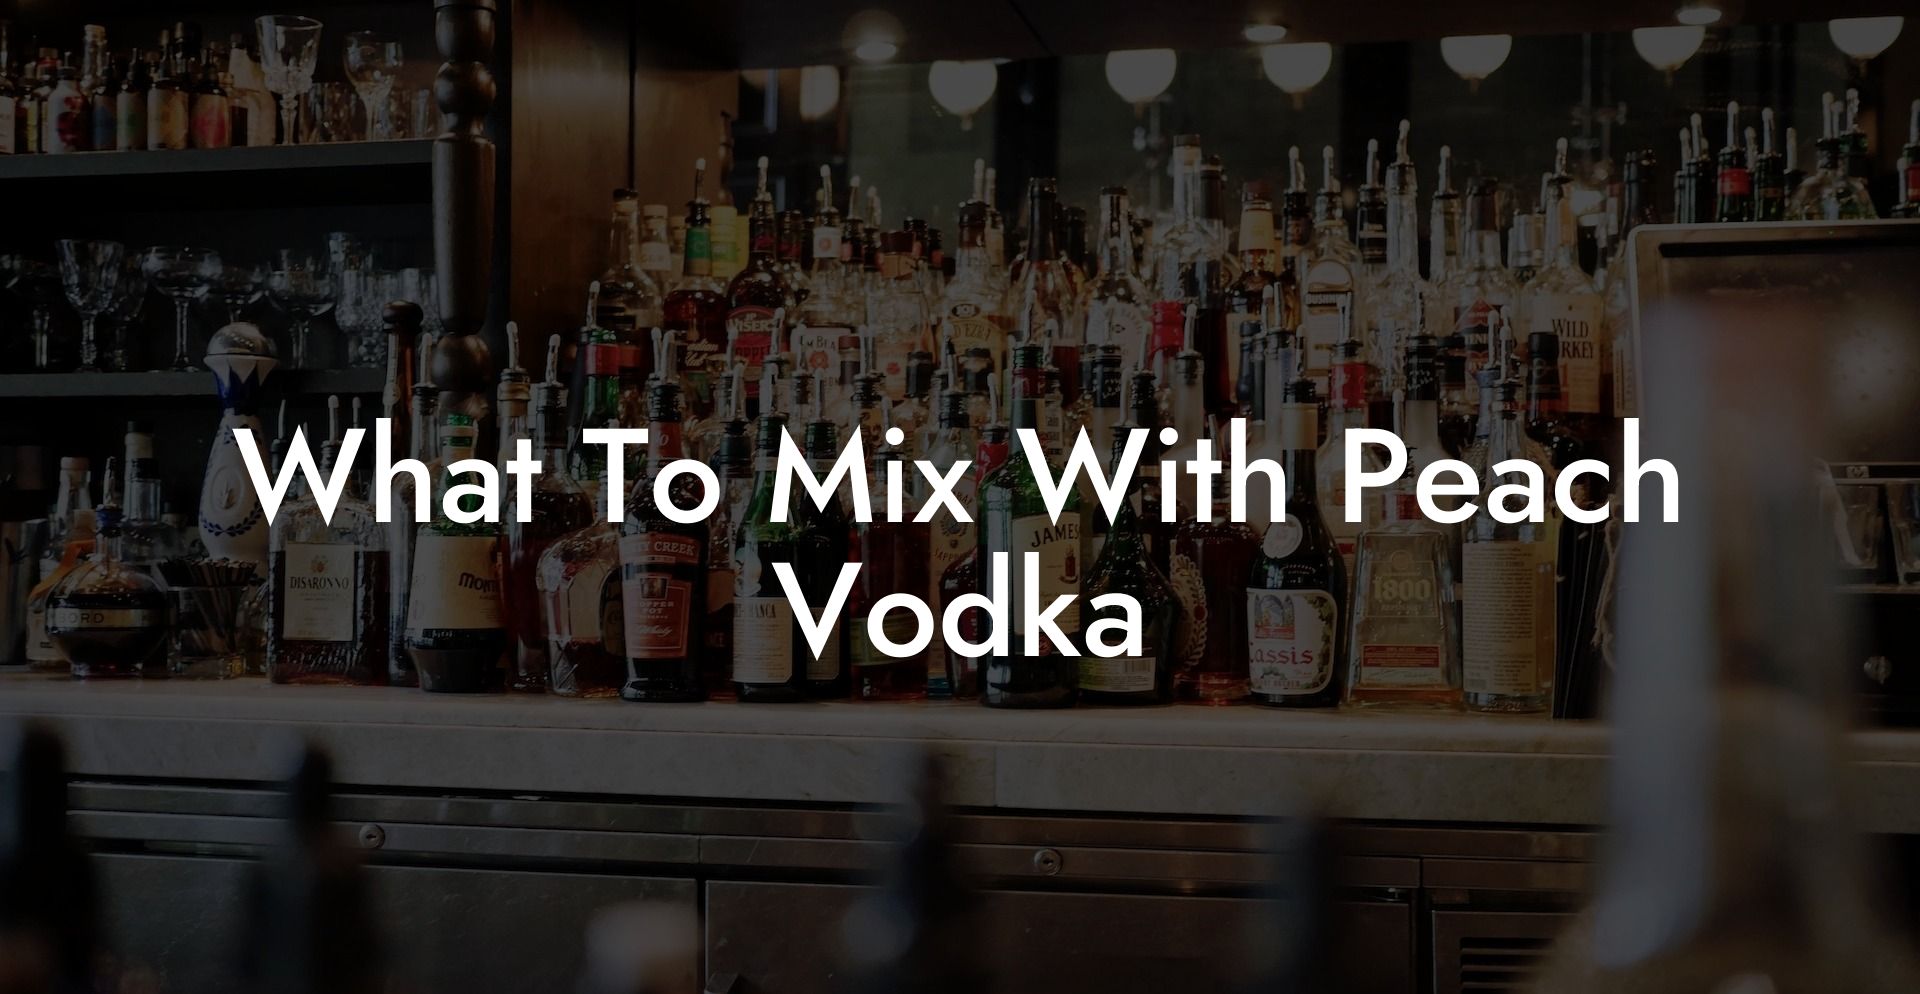 What To Mix With Peach Vodka